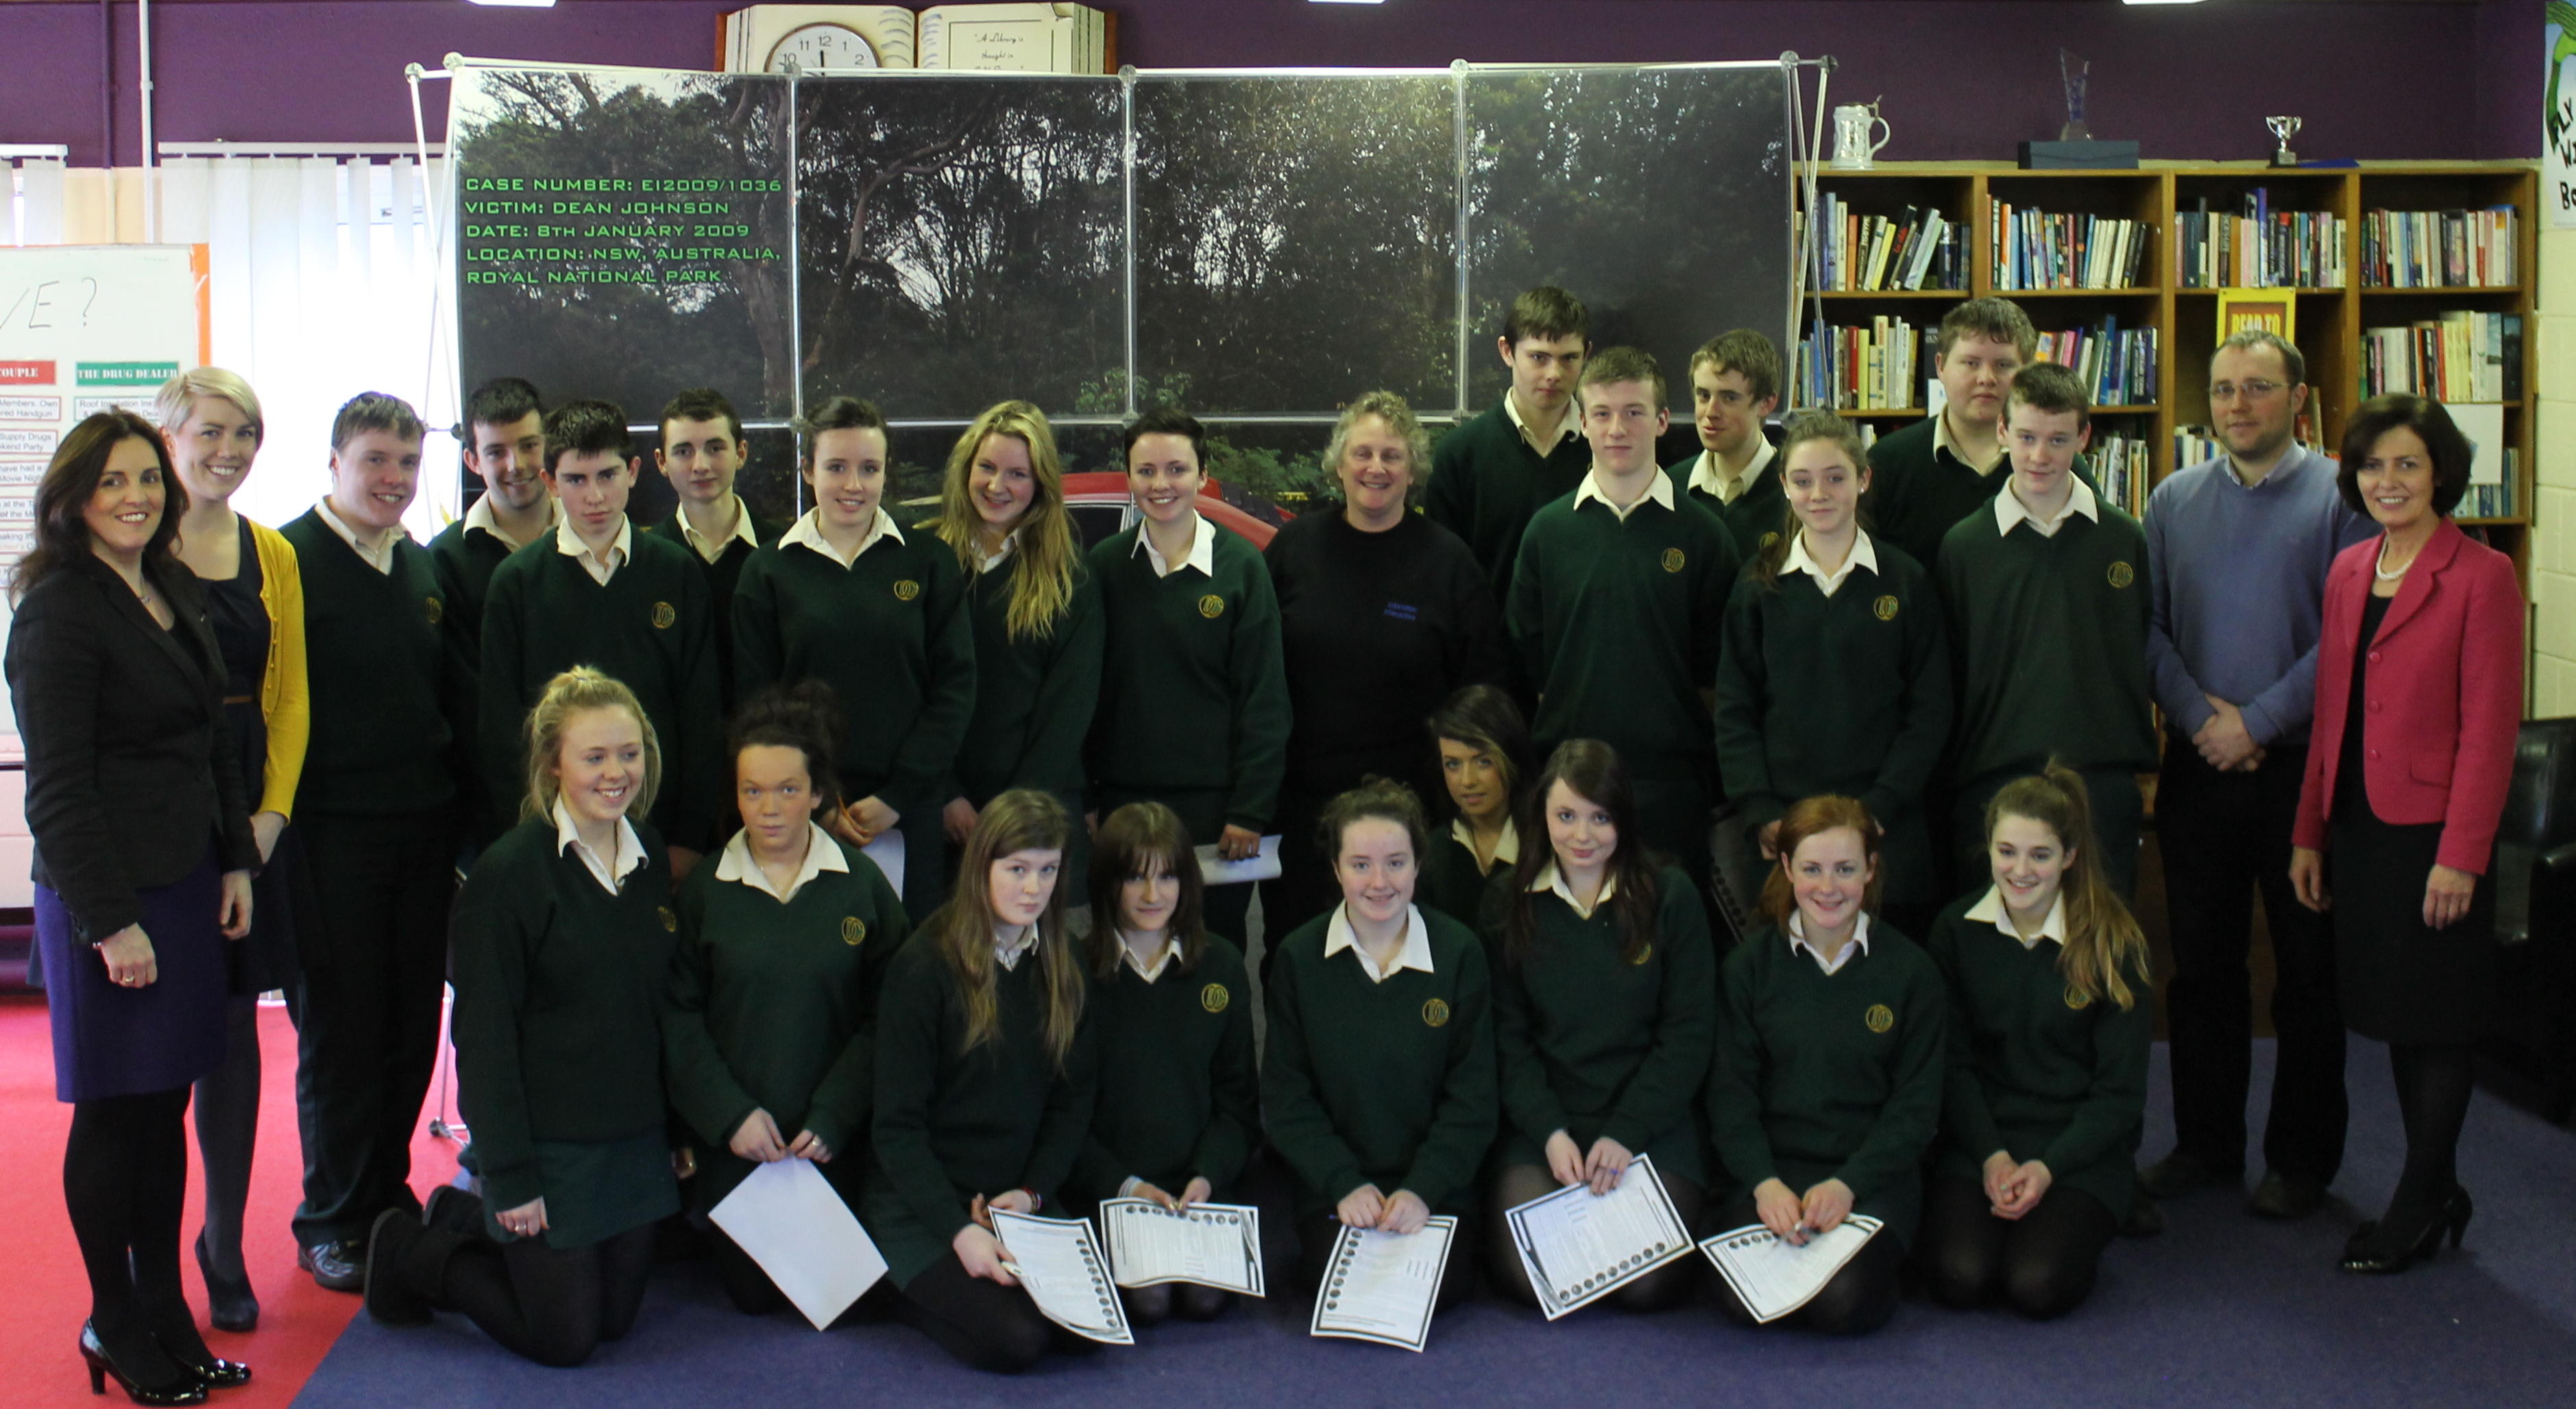 Pictured at the Forensic Science Workshop are Ms. Bernie Rowland, Principal, Davitt College; Ms. Alison Leck, Forensic Scientist; Davitt College Science Teachers and Transition Year students.